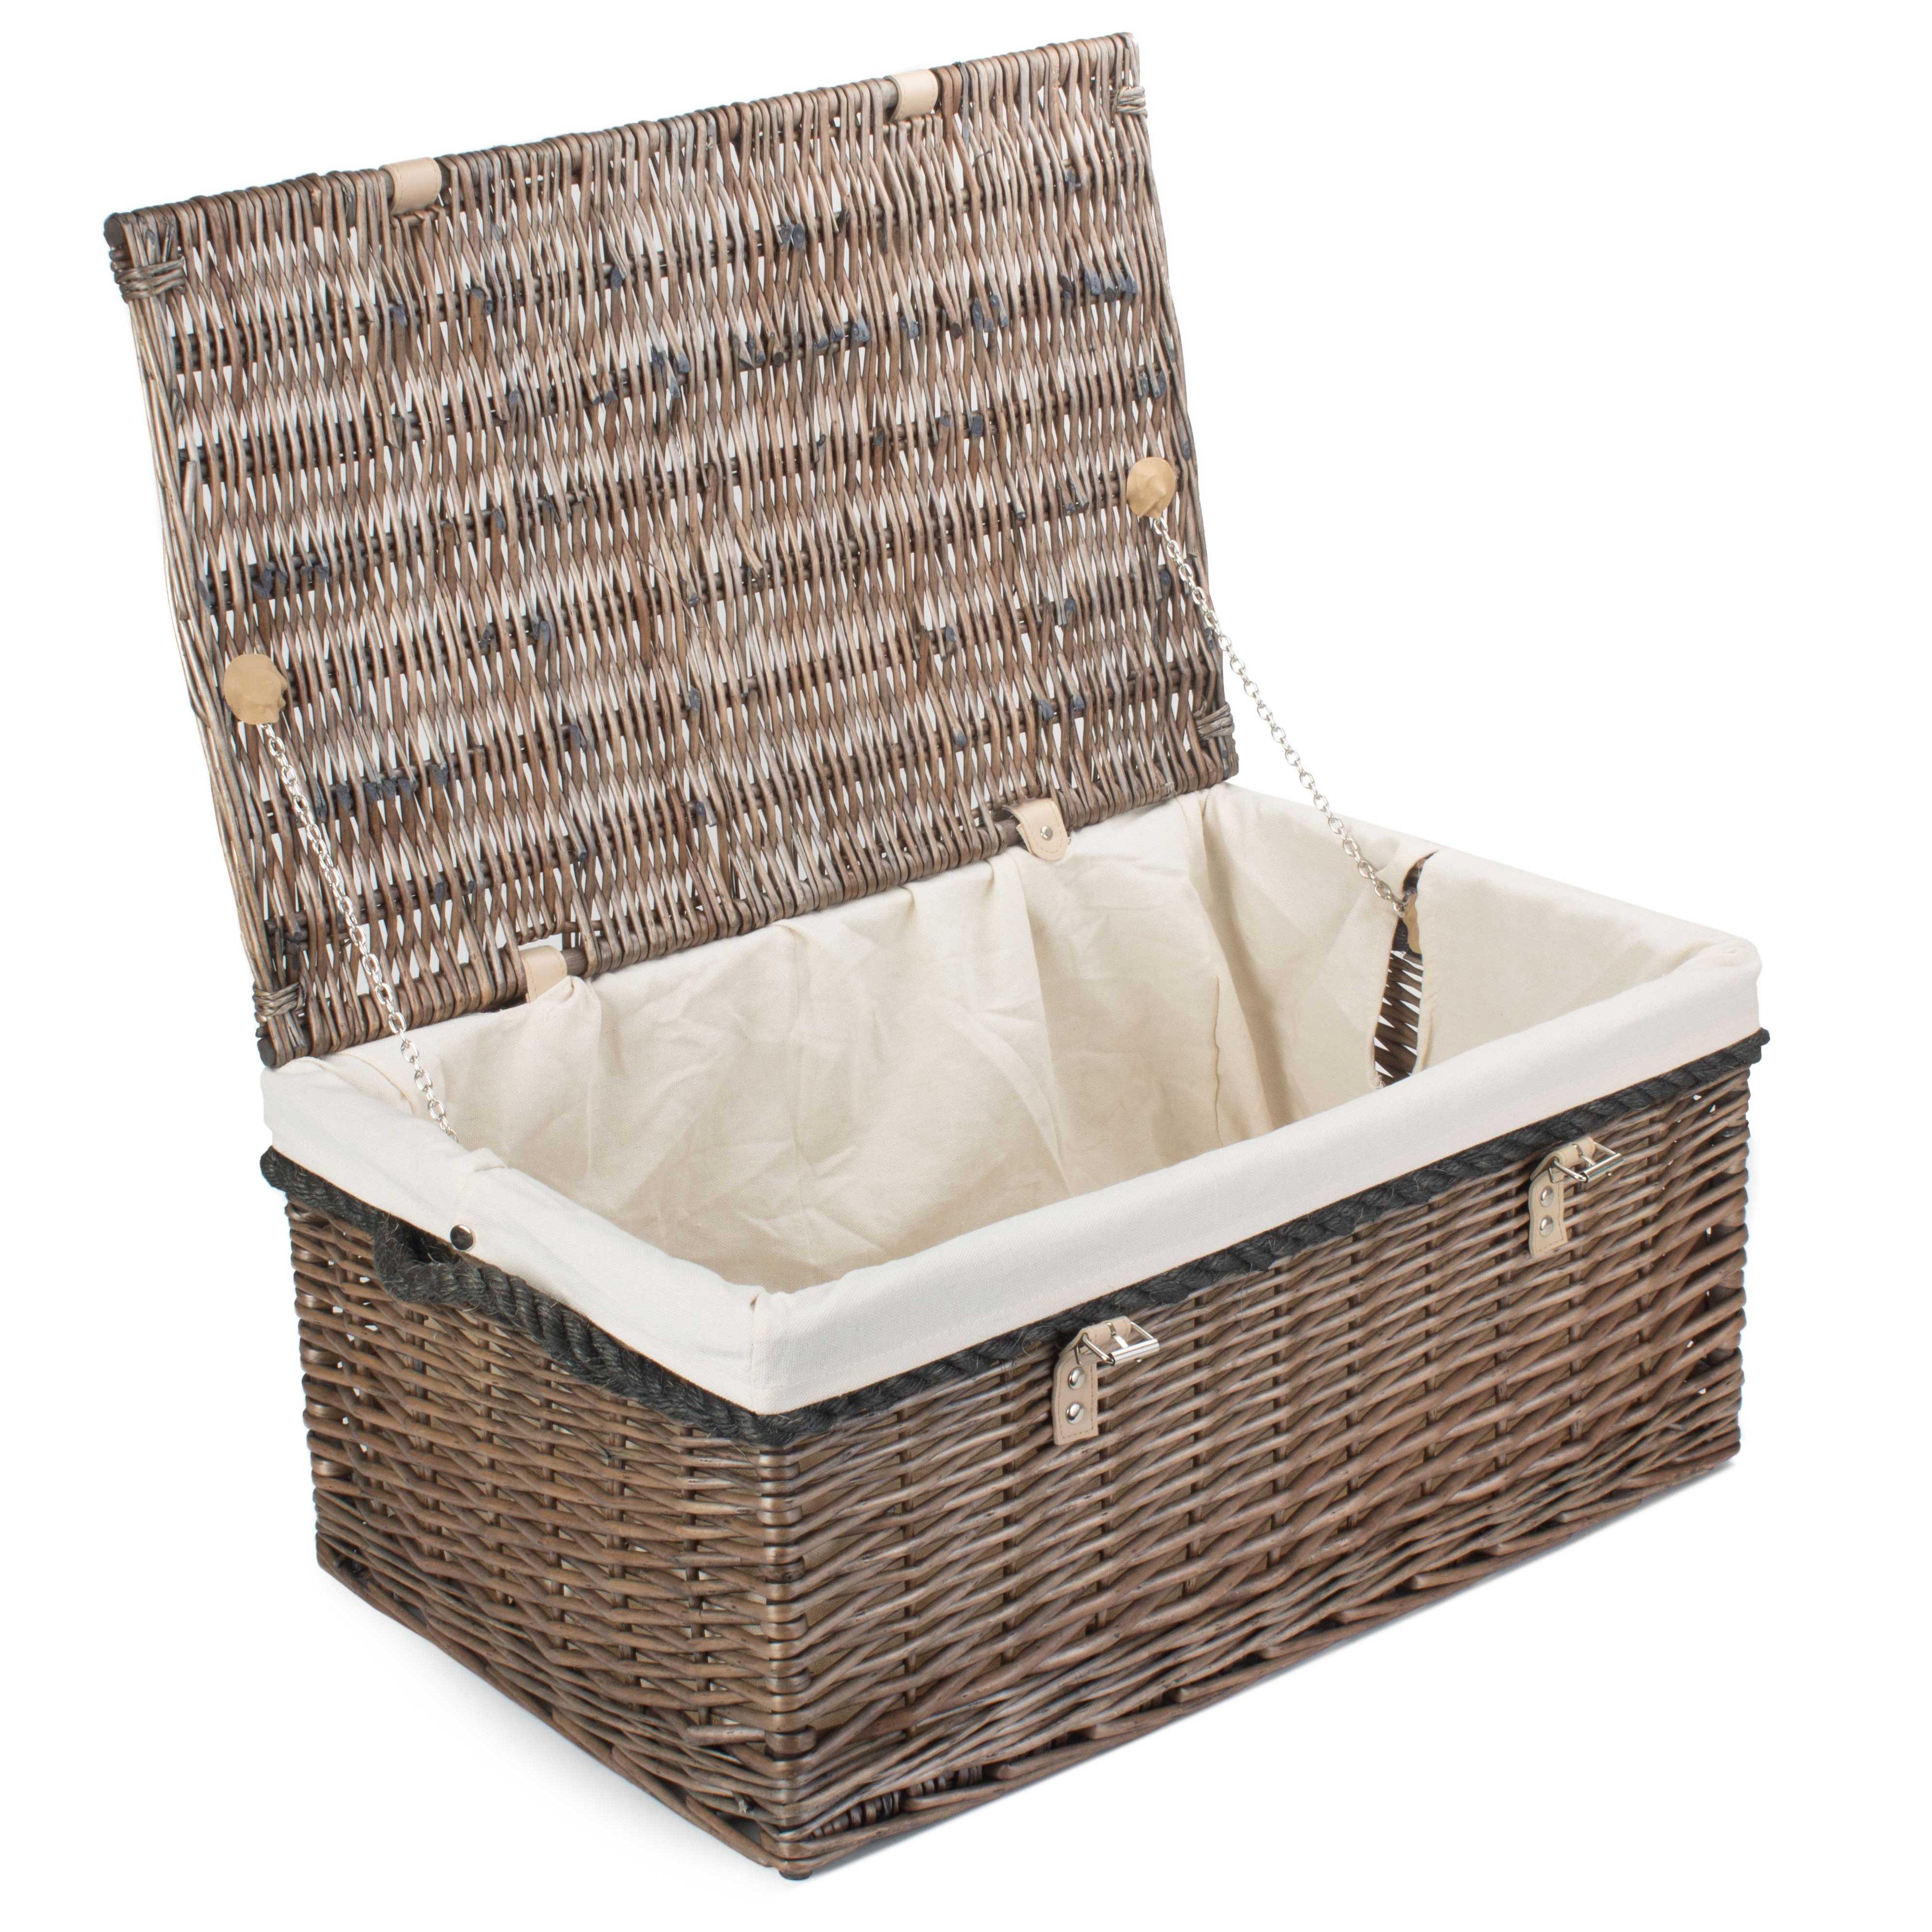 Wicker 62cm Antique Wash Picnic Basket with Cotton Lining